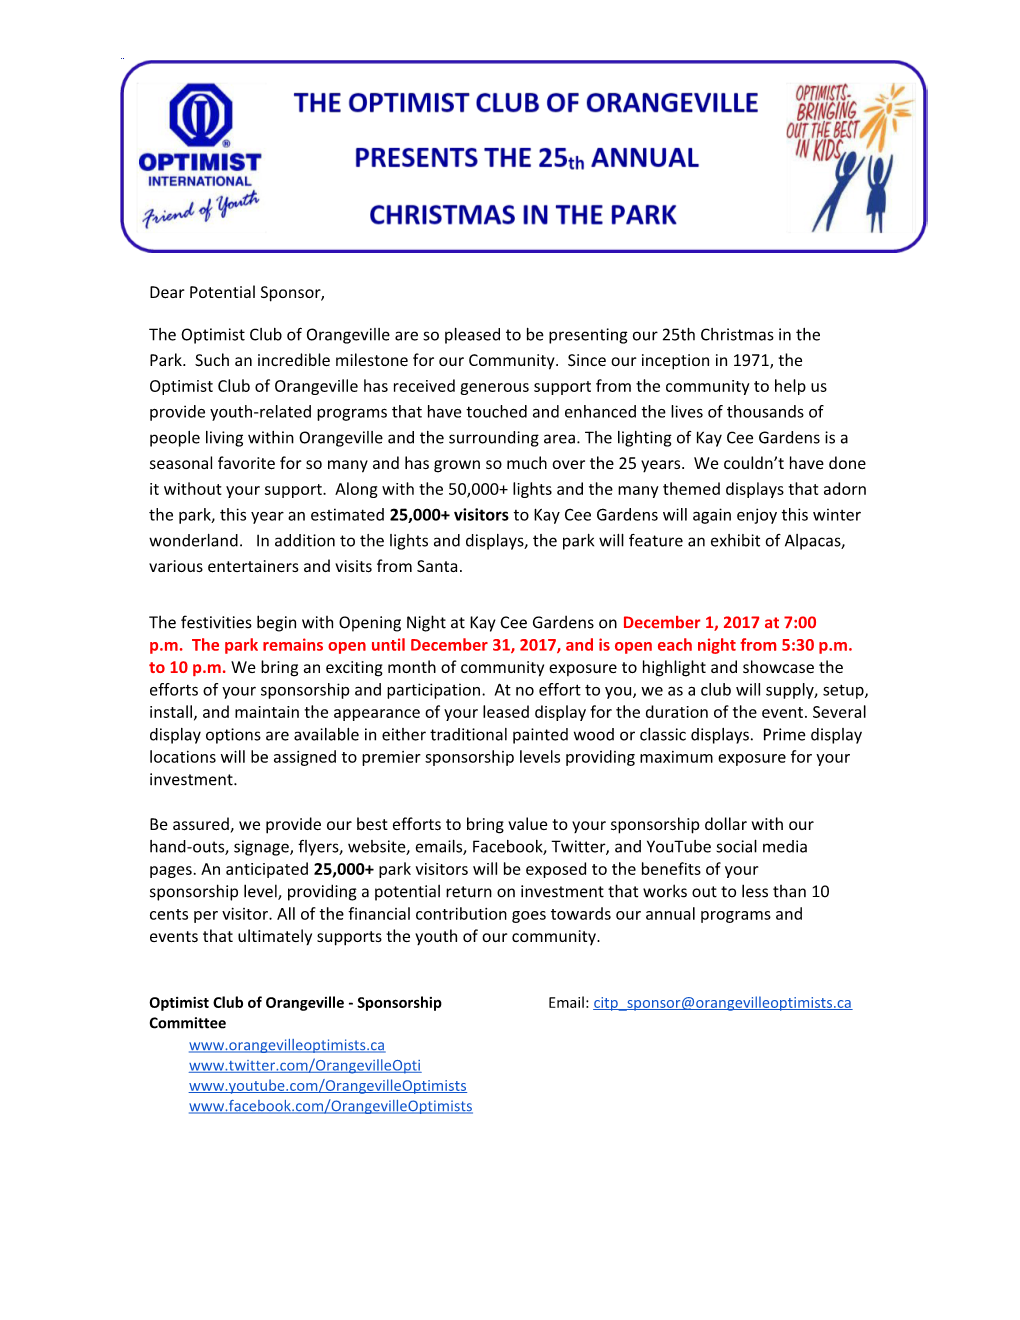 The Optimist Club of Orangeville Are So Pleased to Be Presenting Our 25Th Christmas in The